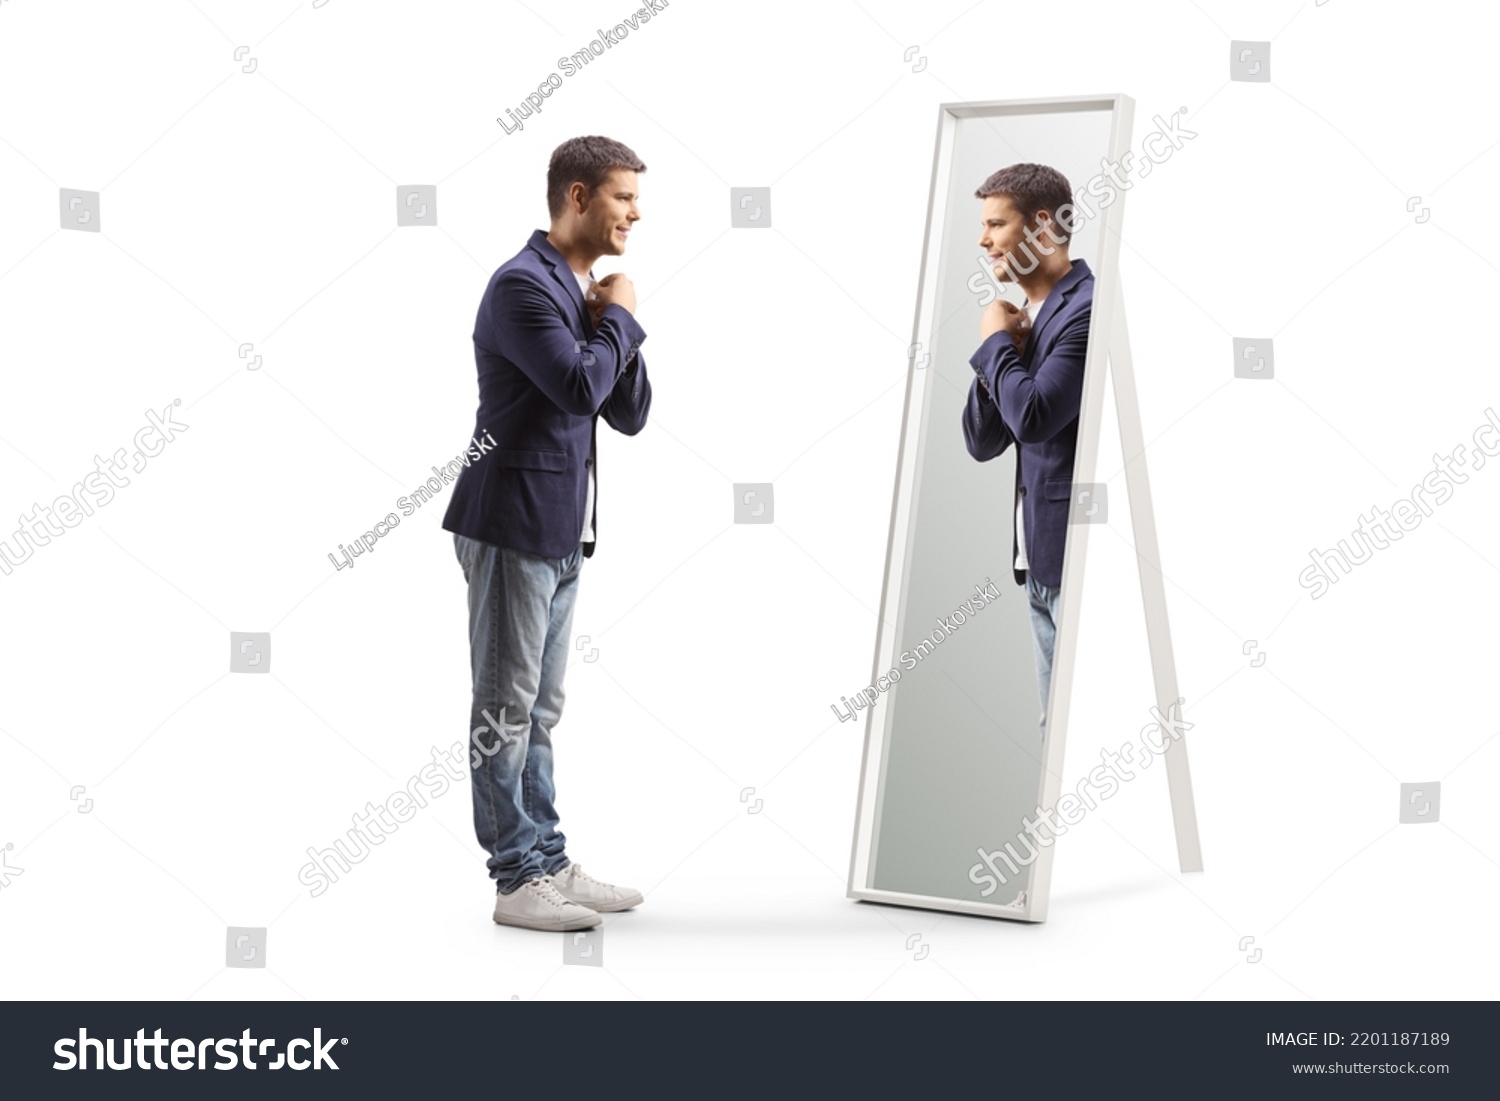 Full length profile shot of a young man getting ready and looking at a mirror isolated on white background #2201187189